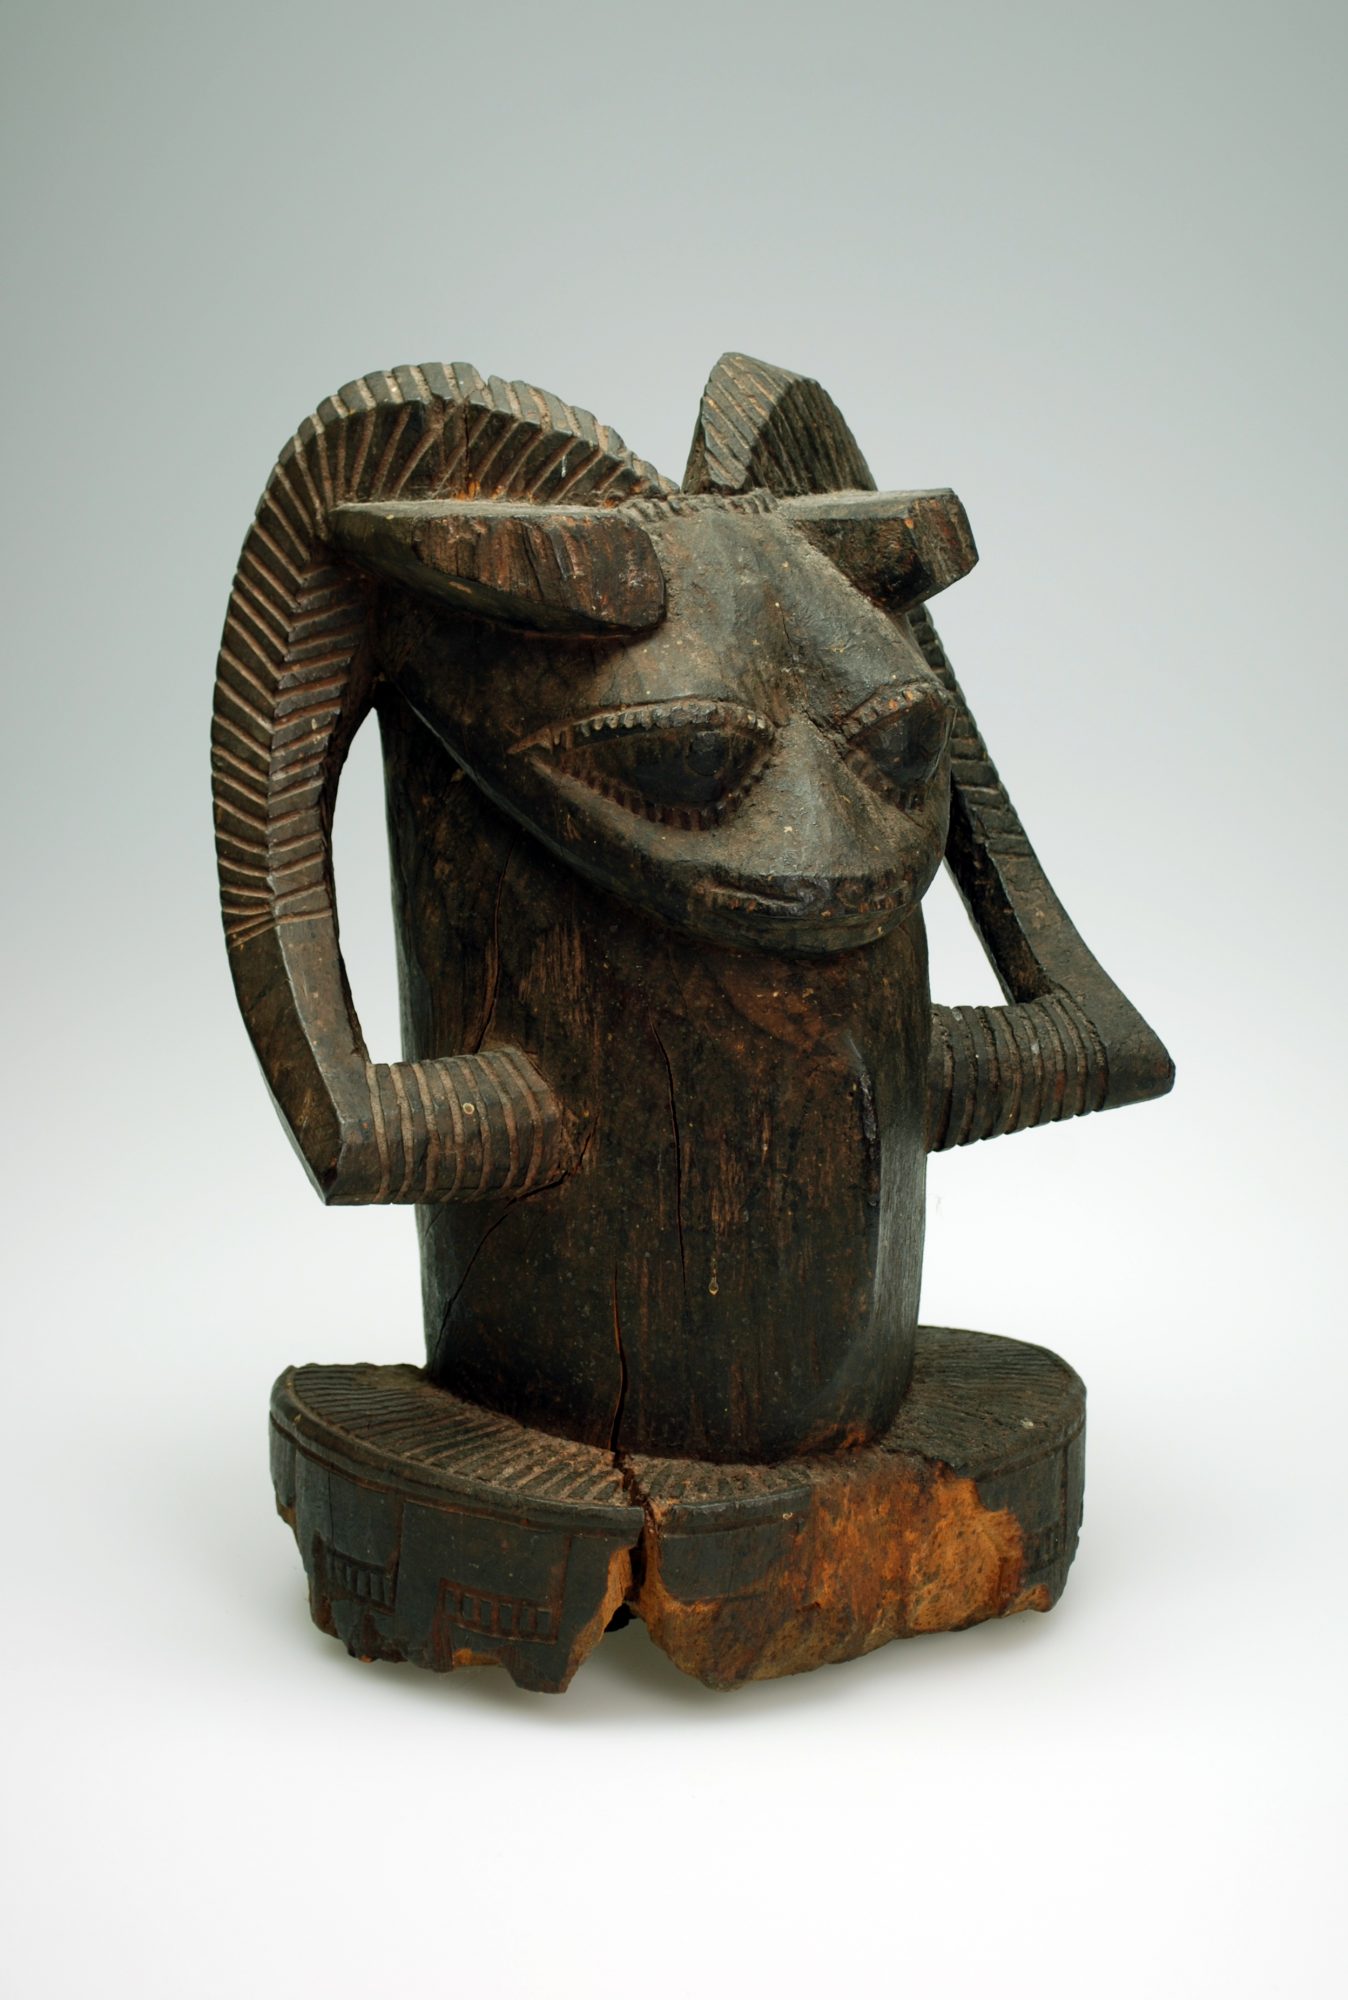 A ram's head sculpture carved from dark wood